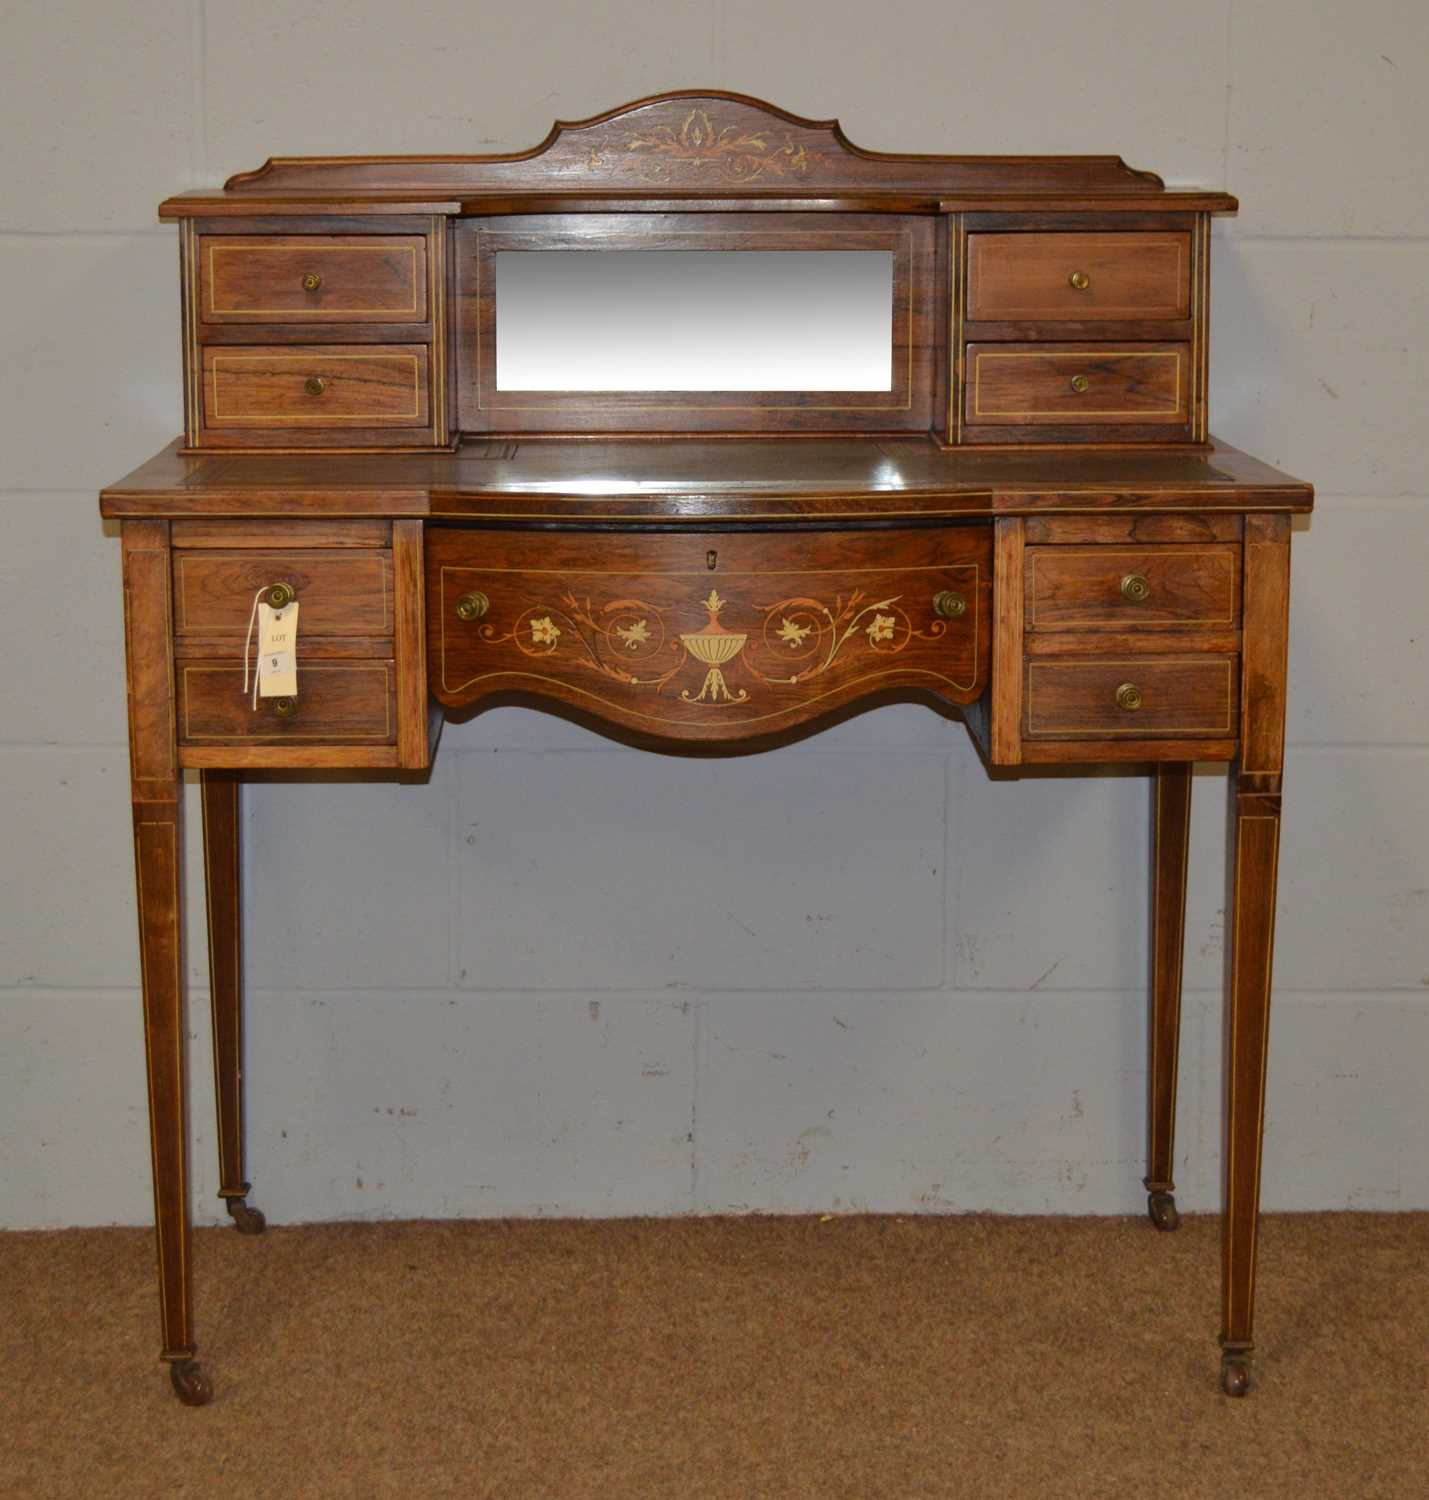 Lot 9 - An Edwardian marquetry inlaid rosewood writing desk, by Maple & Co.